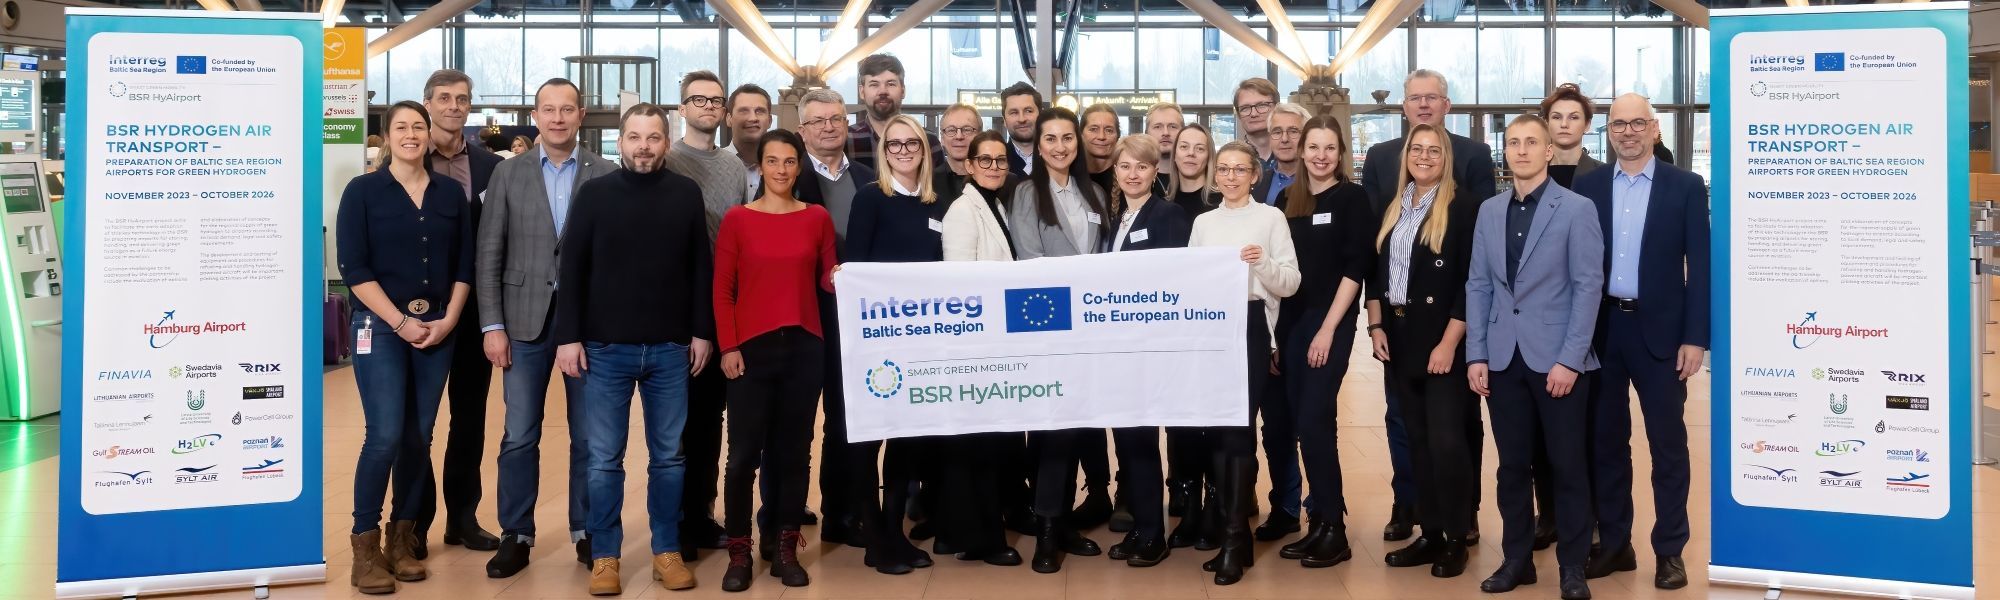 Project Development and Application for Interreg Project "BSR Hydrogen Air Transport"